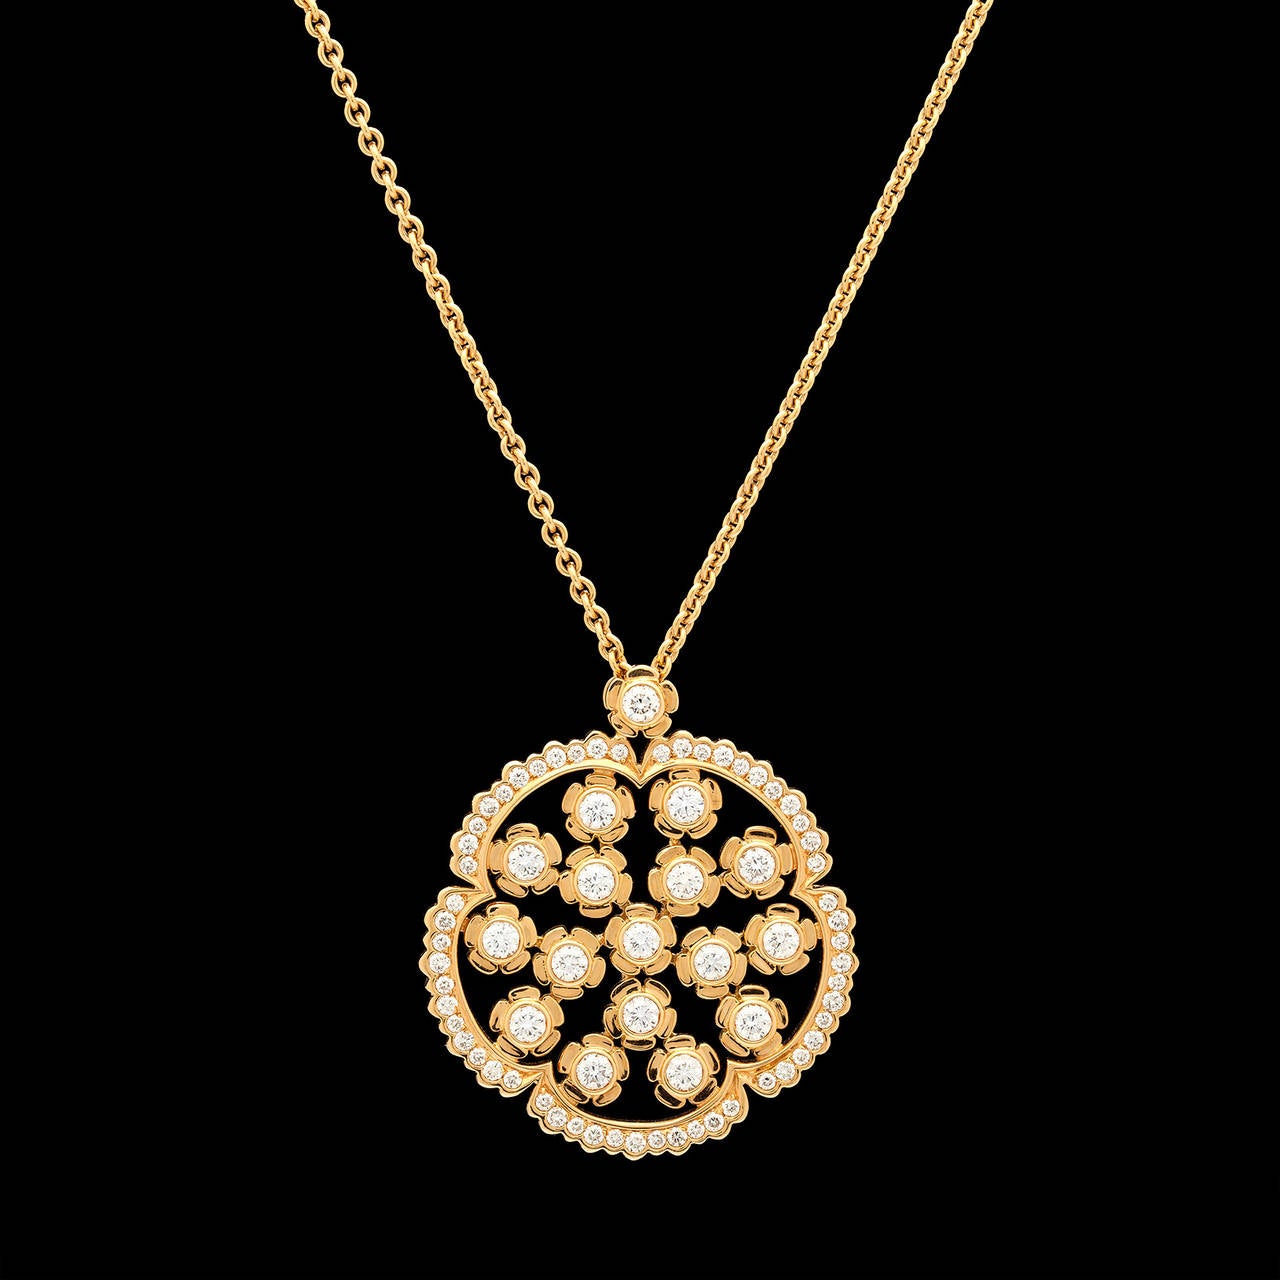 18Kt Yellow Gold Louis Julian Et Fils Necklace Adorned with 28 Round Brilliant Cut Diamonds Enhancing a 33mm Geometric Flower Pendant. The chain can be worn at 14, 15 or 16 inches. Total weight is 18.7 grams.